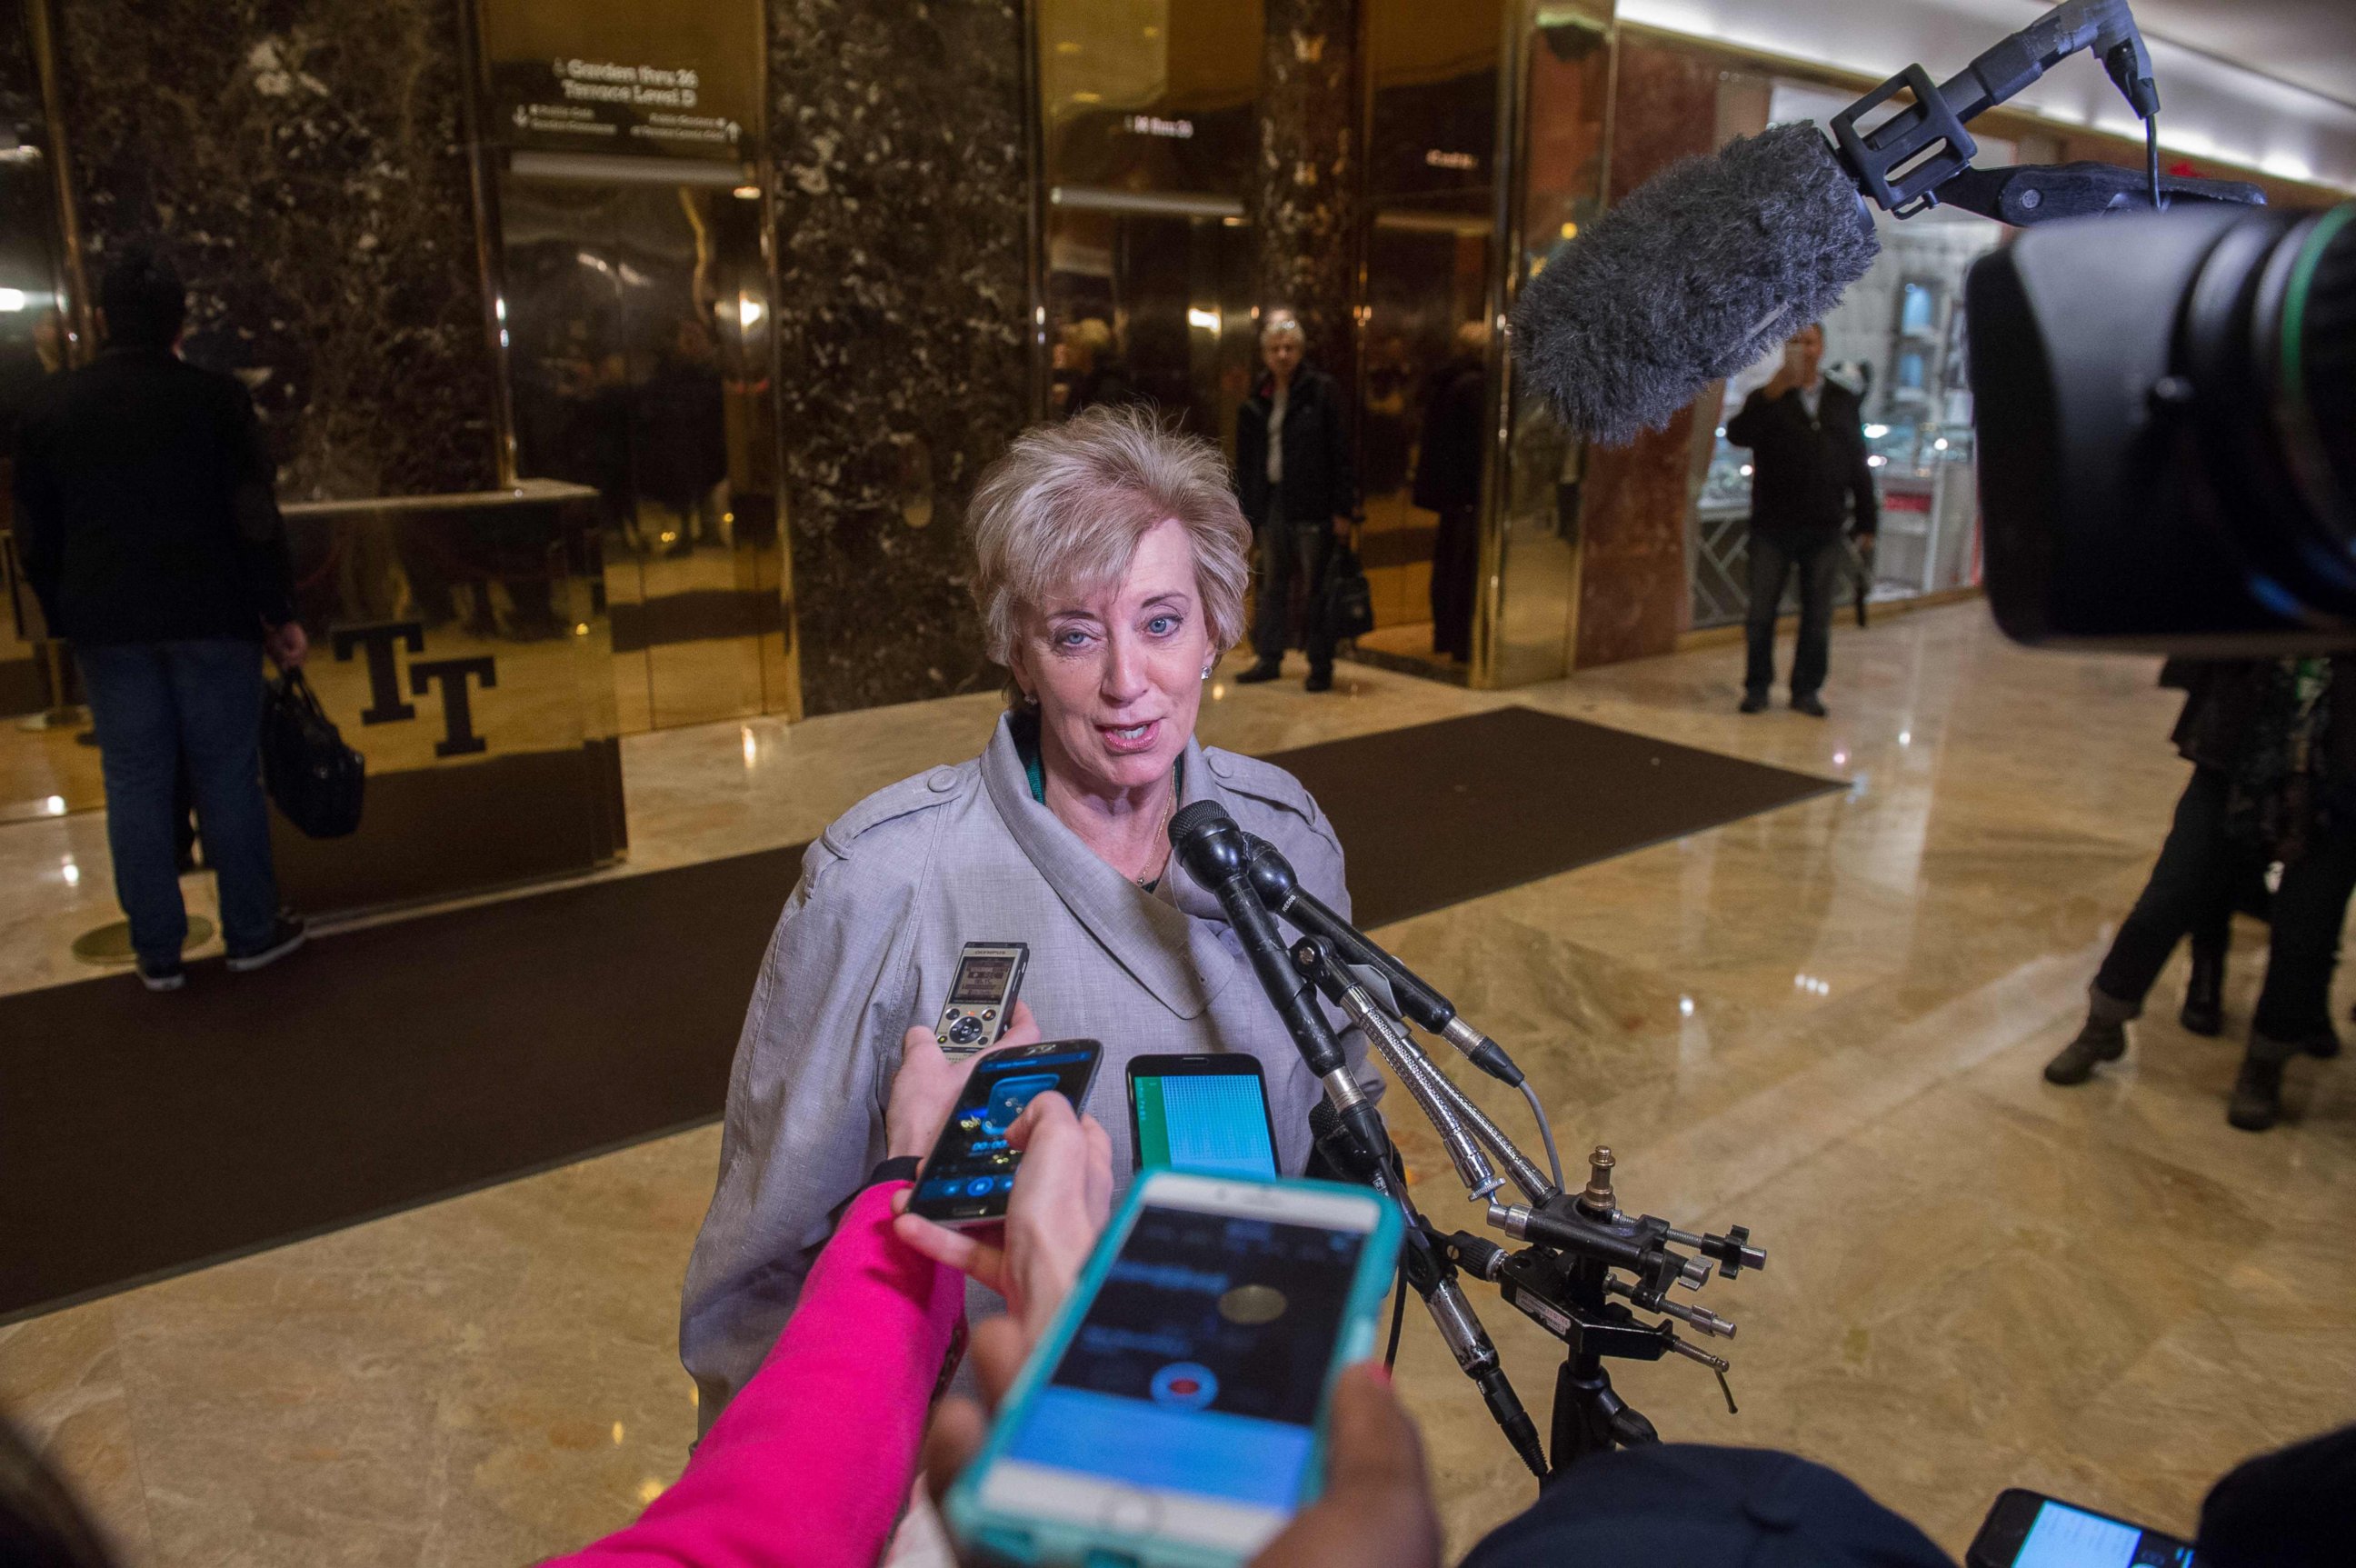 PHOTO: Former Republican Party Senate candidate Linda McMahon speaks to the media at Trump Tower in New York City, Nov. 30, 2016.